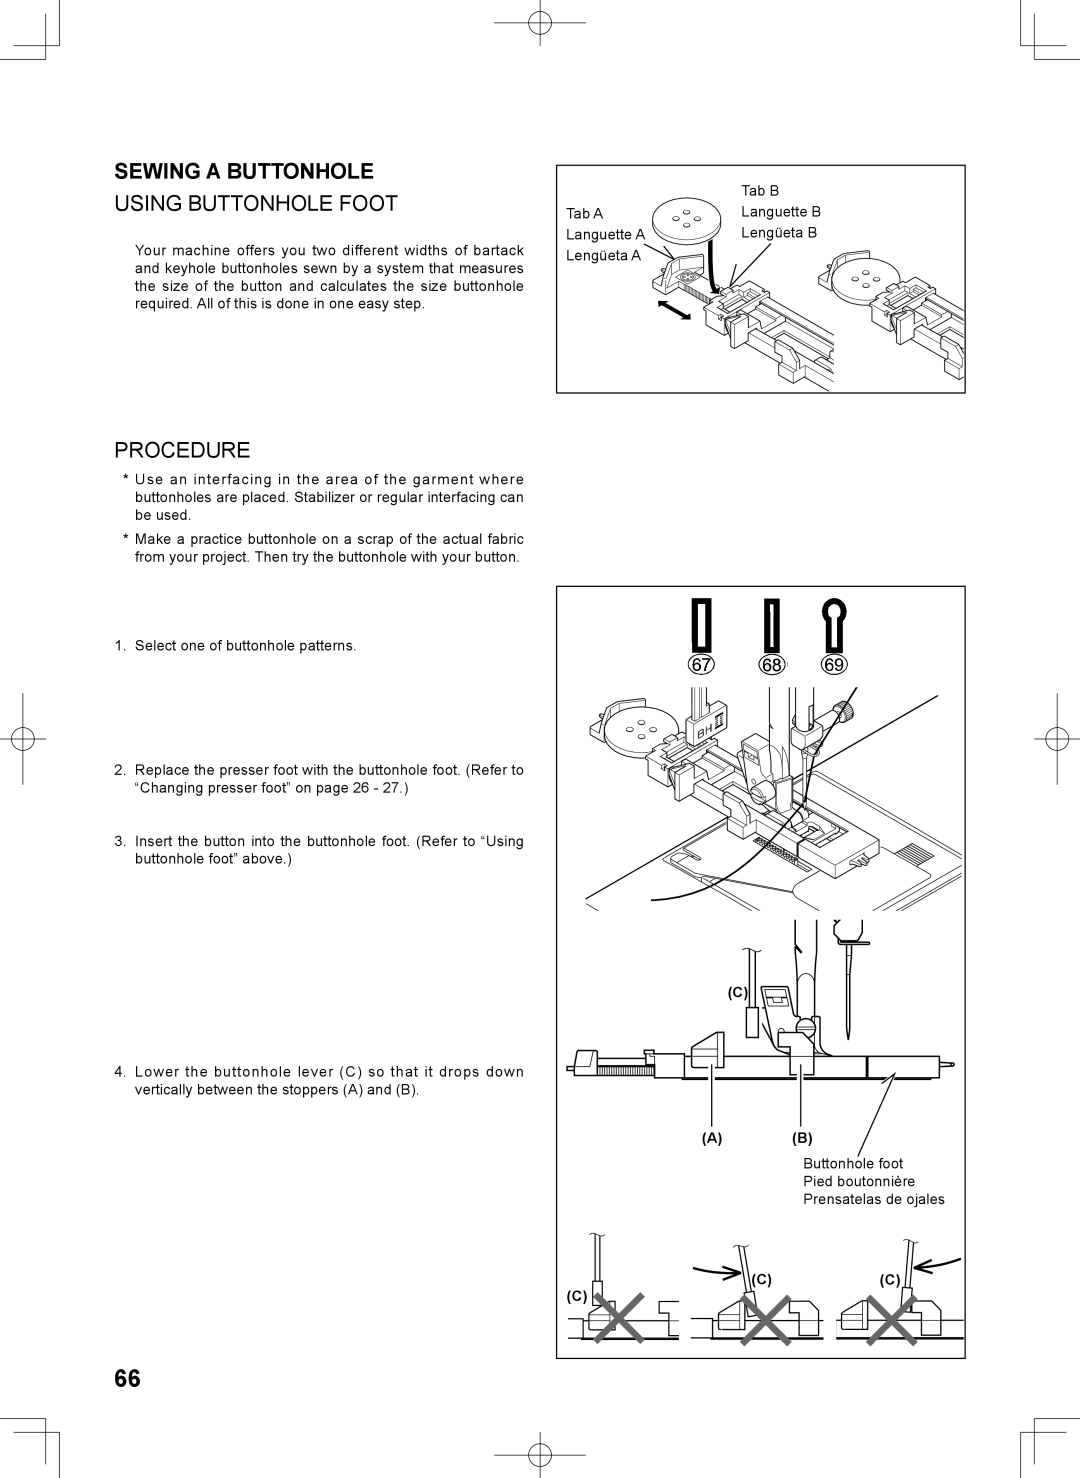 Singer 7467S instruction manual Sewing A Buttonhole, Using Buttonhole Foot, Procedure 